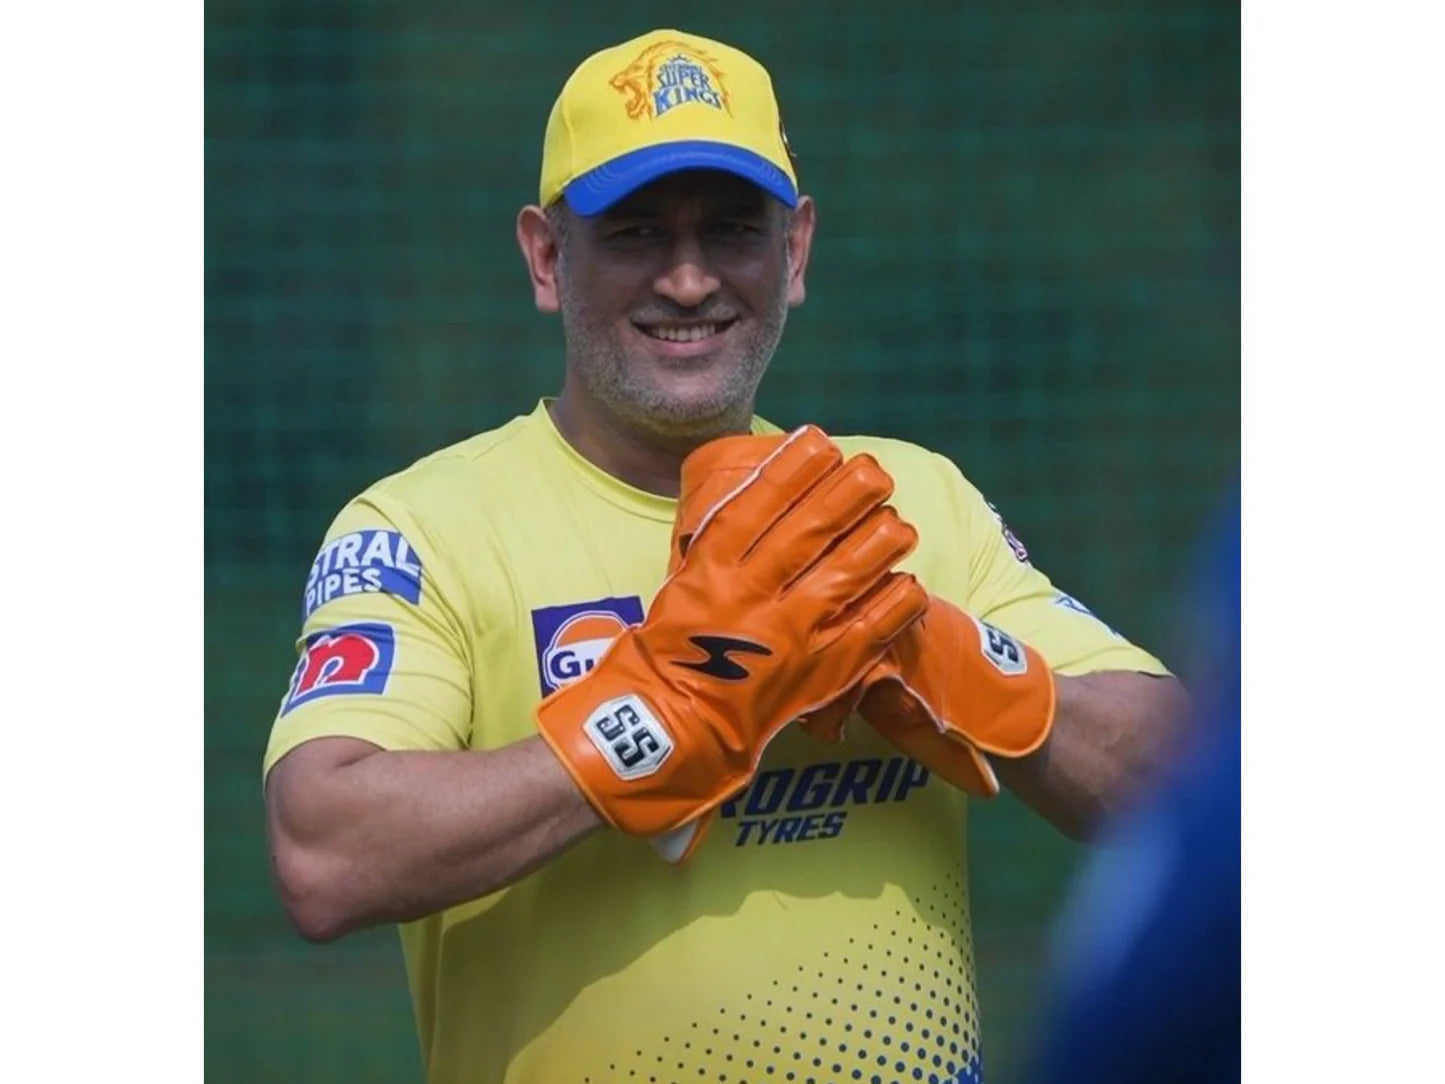 SS MSD Dhoni Orange Players Wicket Keeping Gloves - 2024